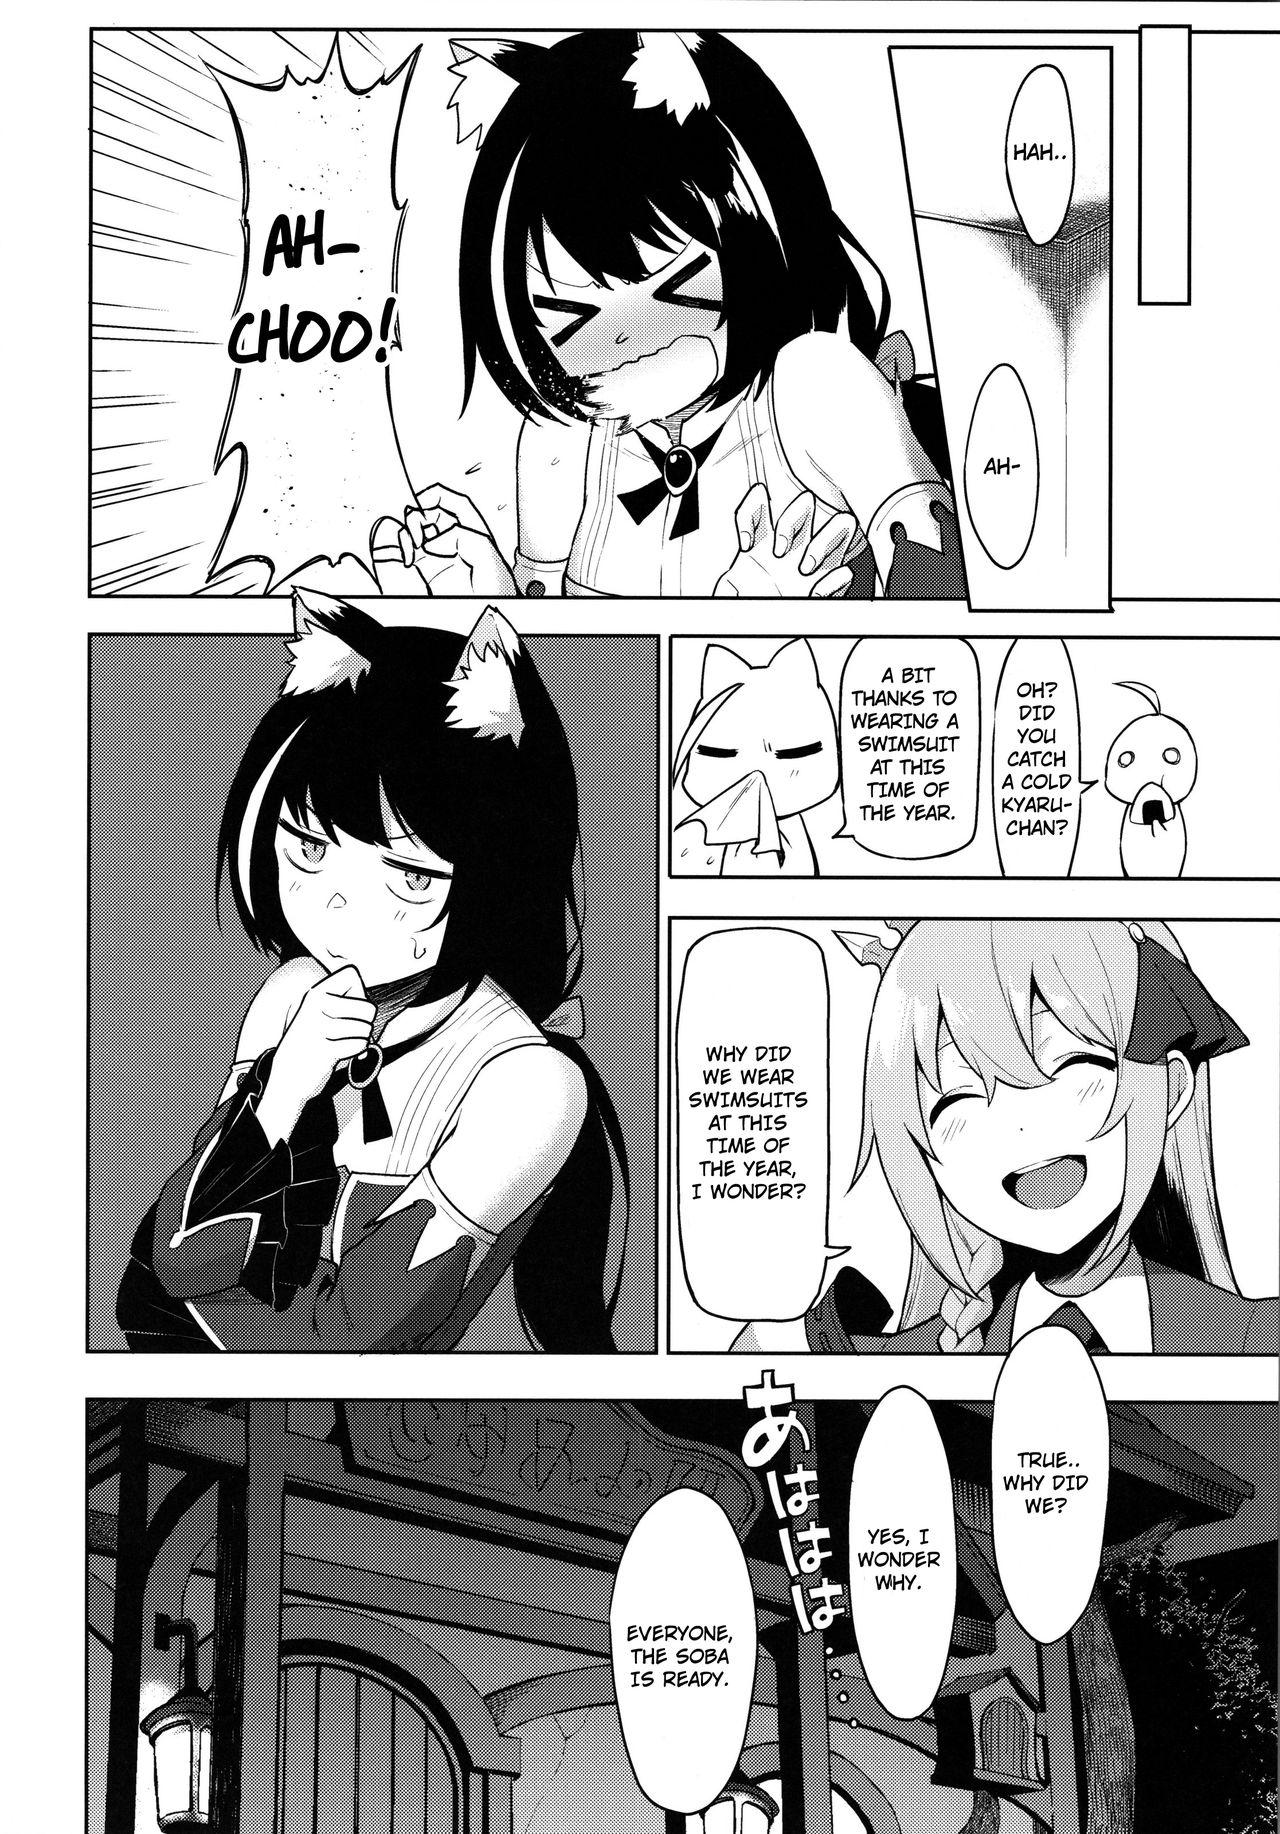 Cum Swallow Princess to Connect Shitai! ReDive! | I want to connect with a princess! ReDive! - Princess connect 8teen - Page 25